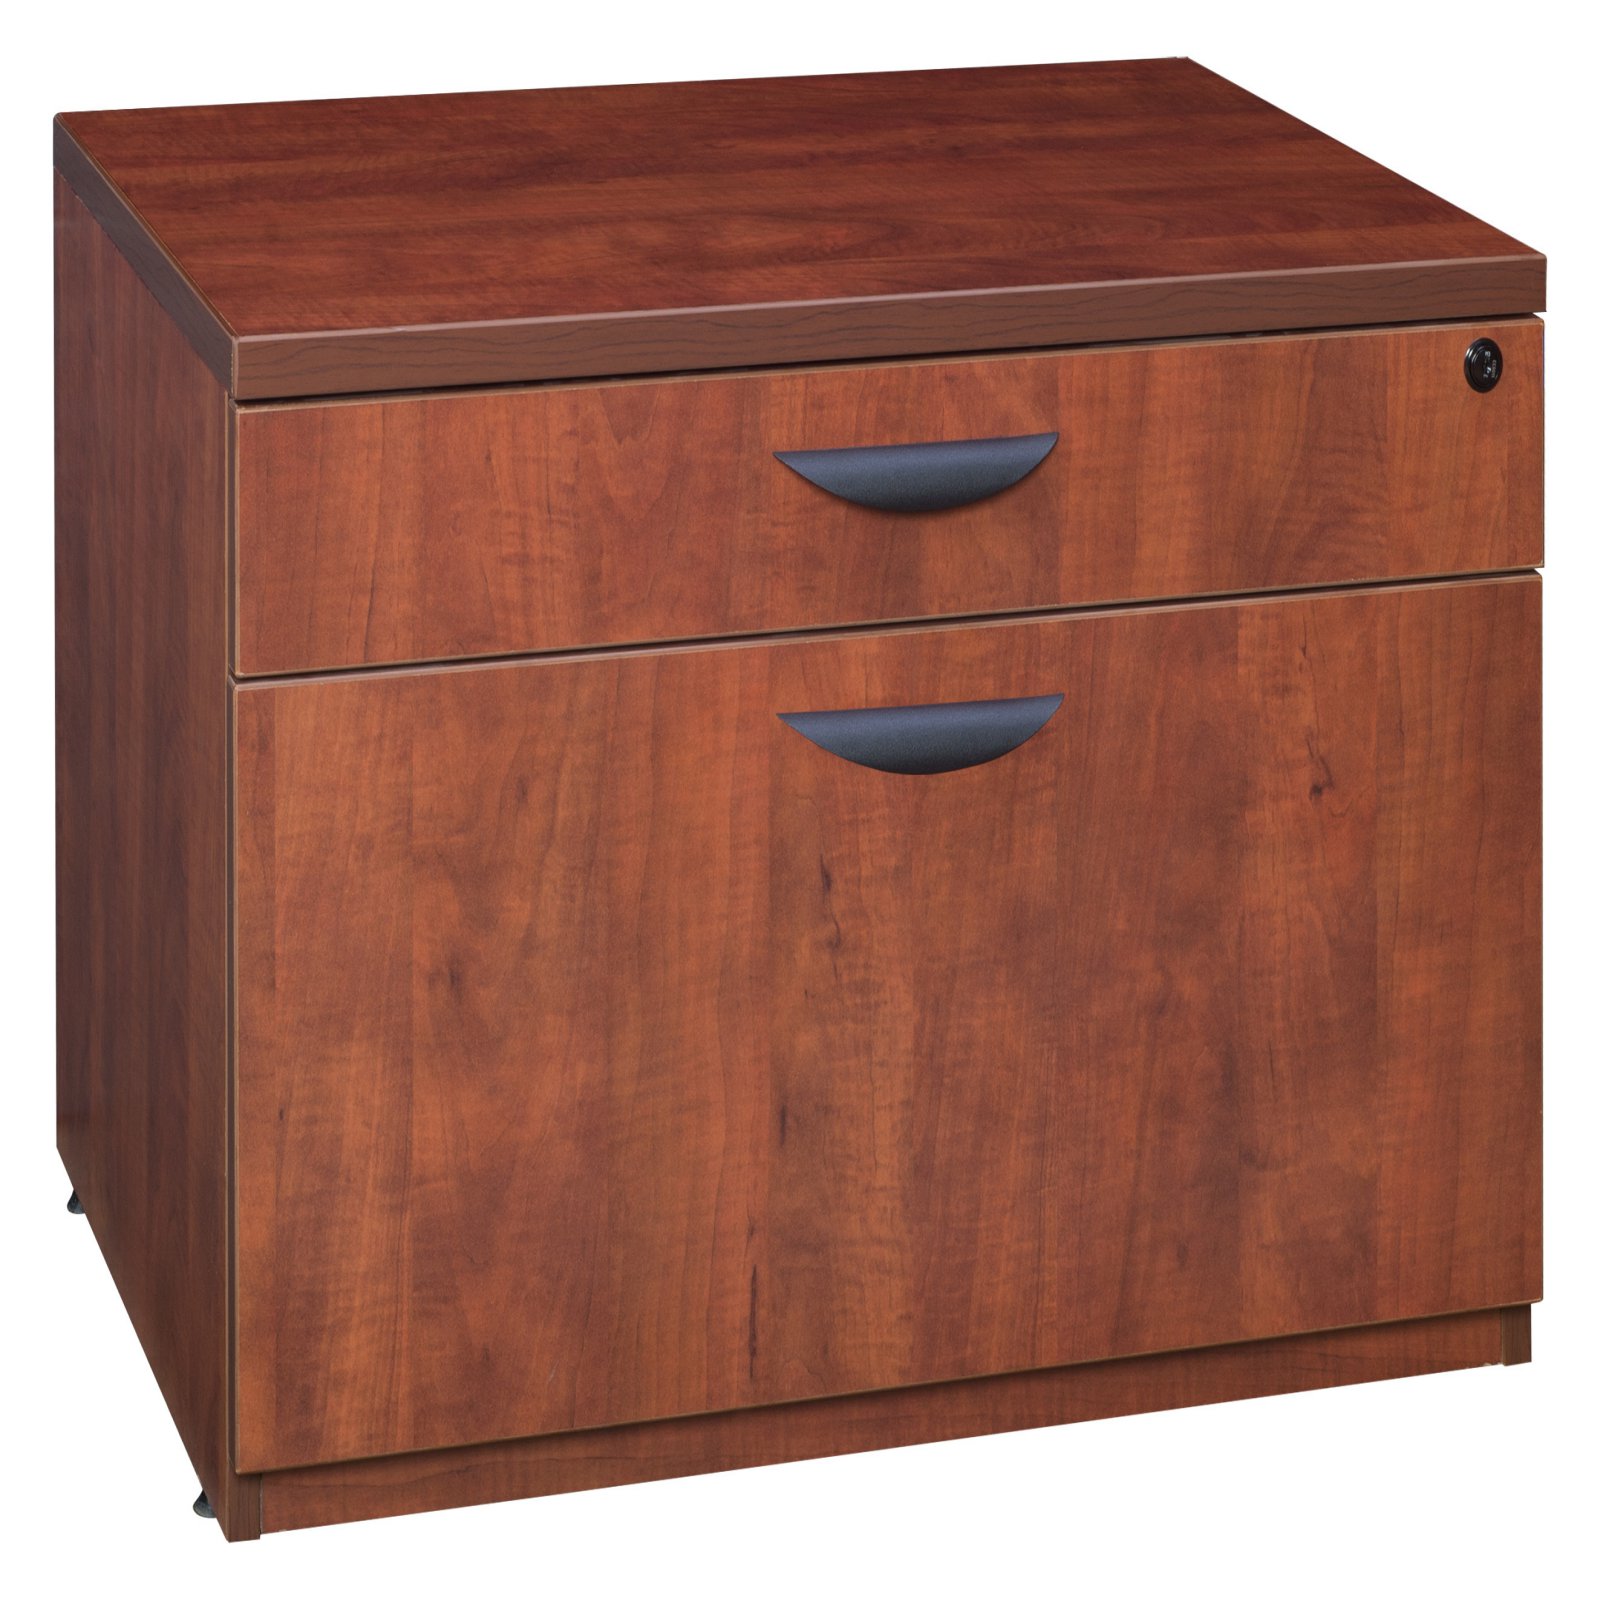 Regency Legacy 20 in. 2 Drawer Low Lateral File- Cherry - image 1 of 7